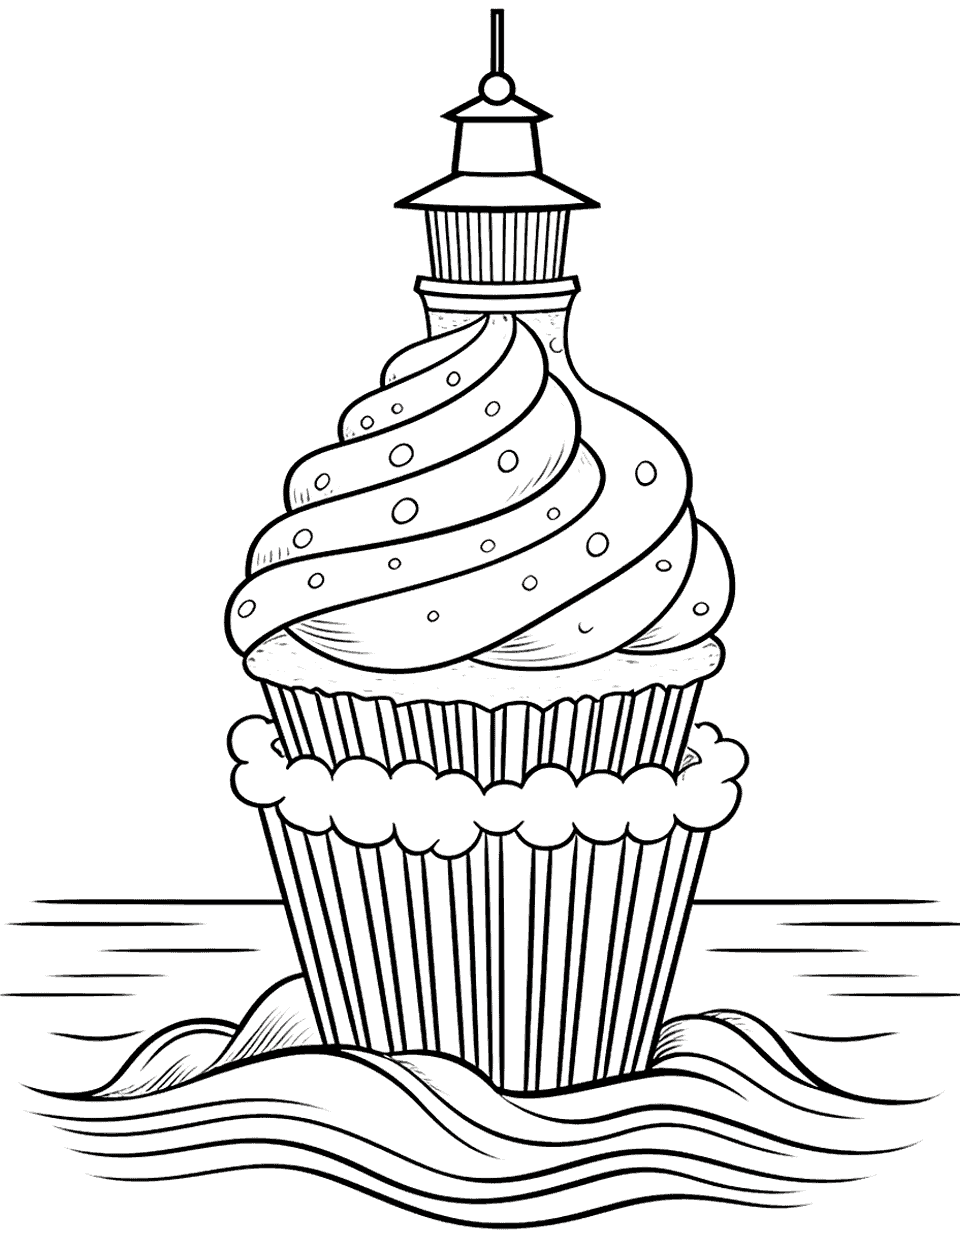 Cupcake Lighthouse Coloring Page - A cupcake designed like a lighthouse with foam decoration that looks like a sea around it.